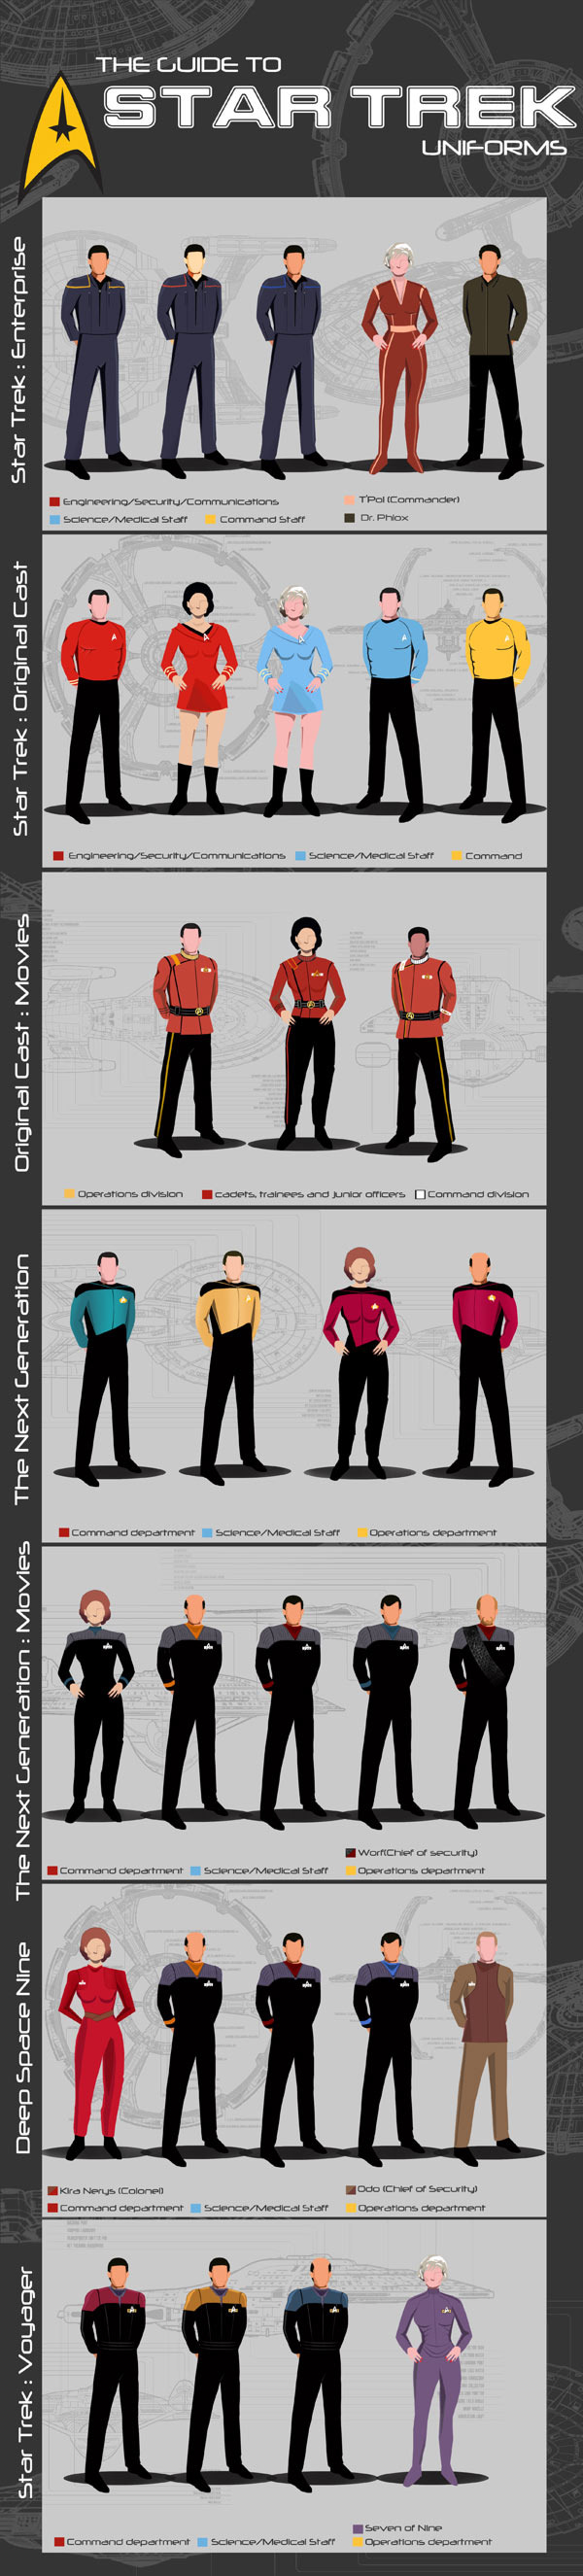 The Guide to Star Trek Uniforms infographic